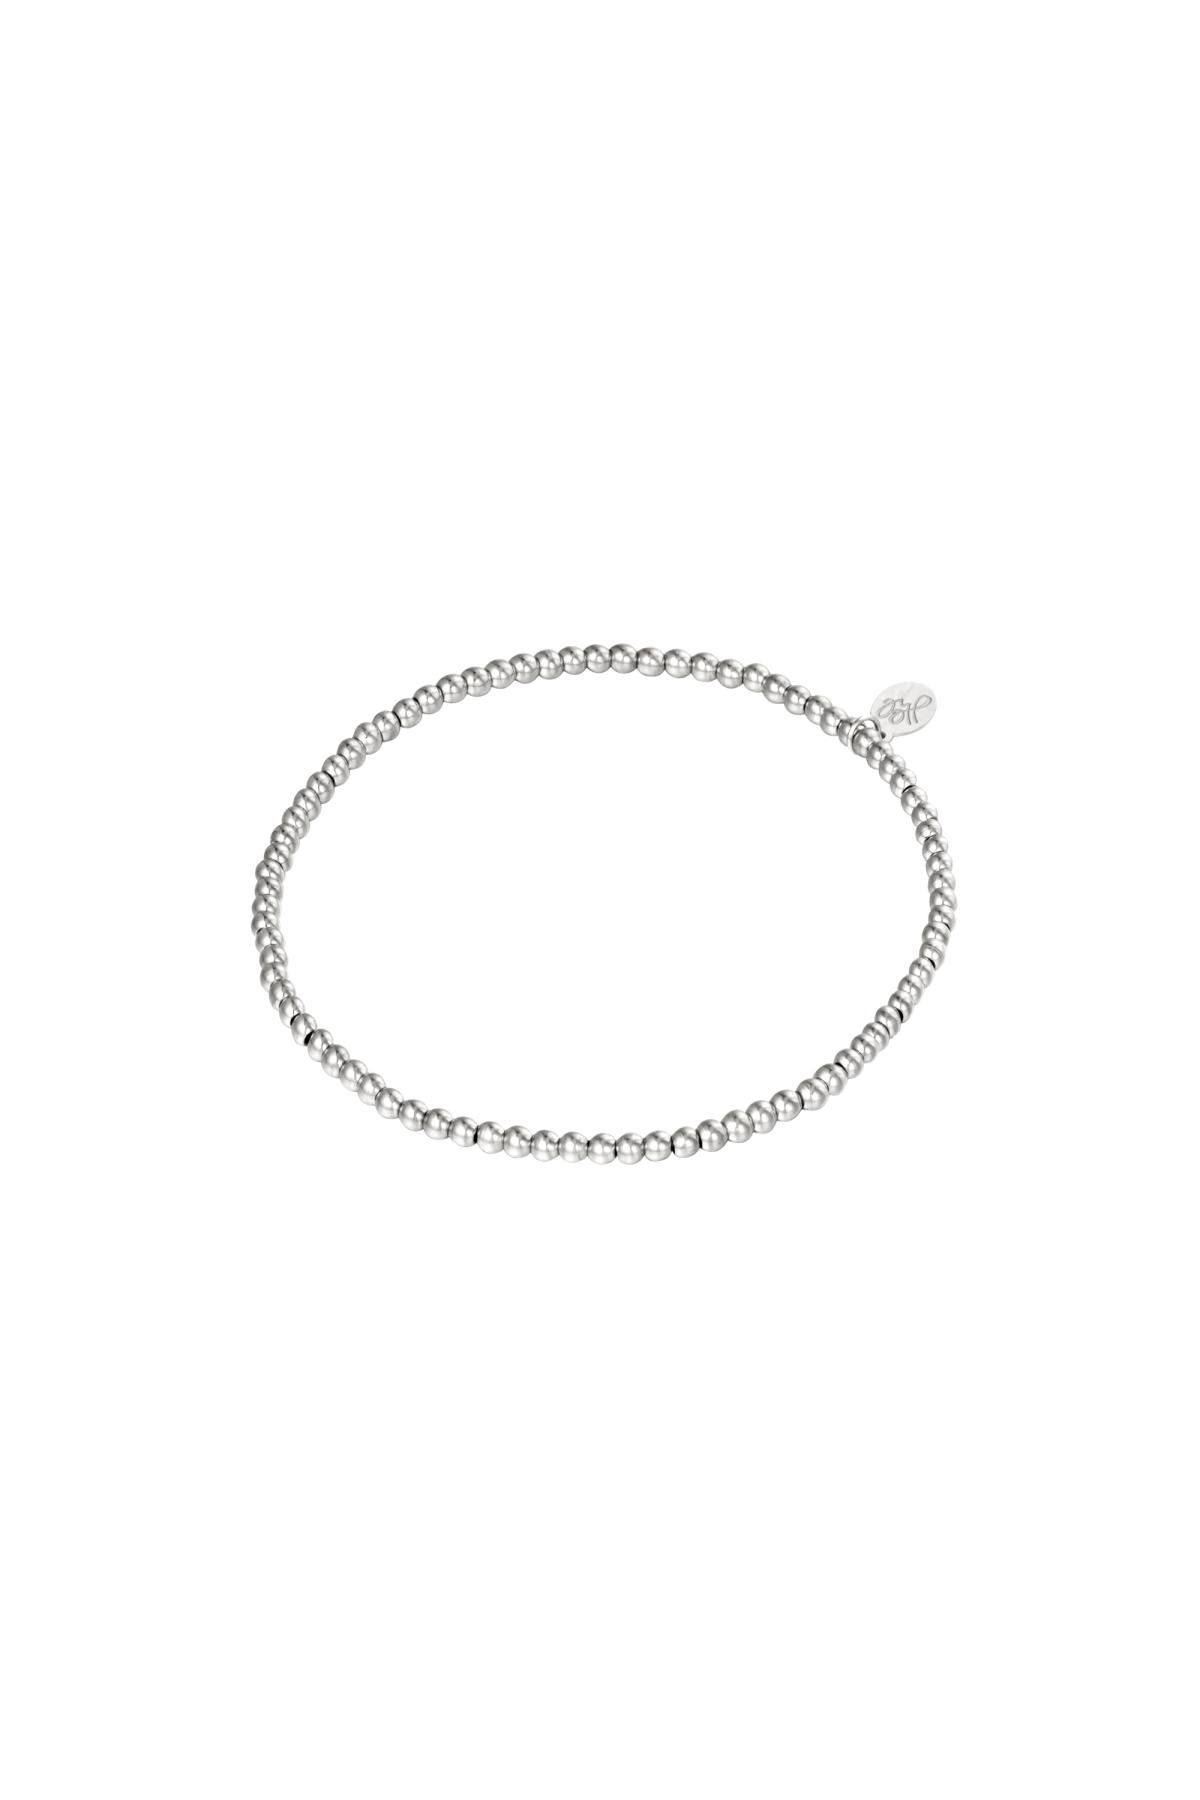 Armband Small Beads Zilver Stainless Steel-2.5MM